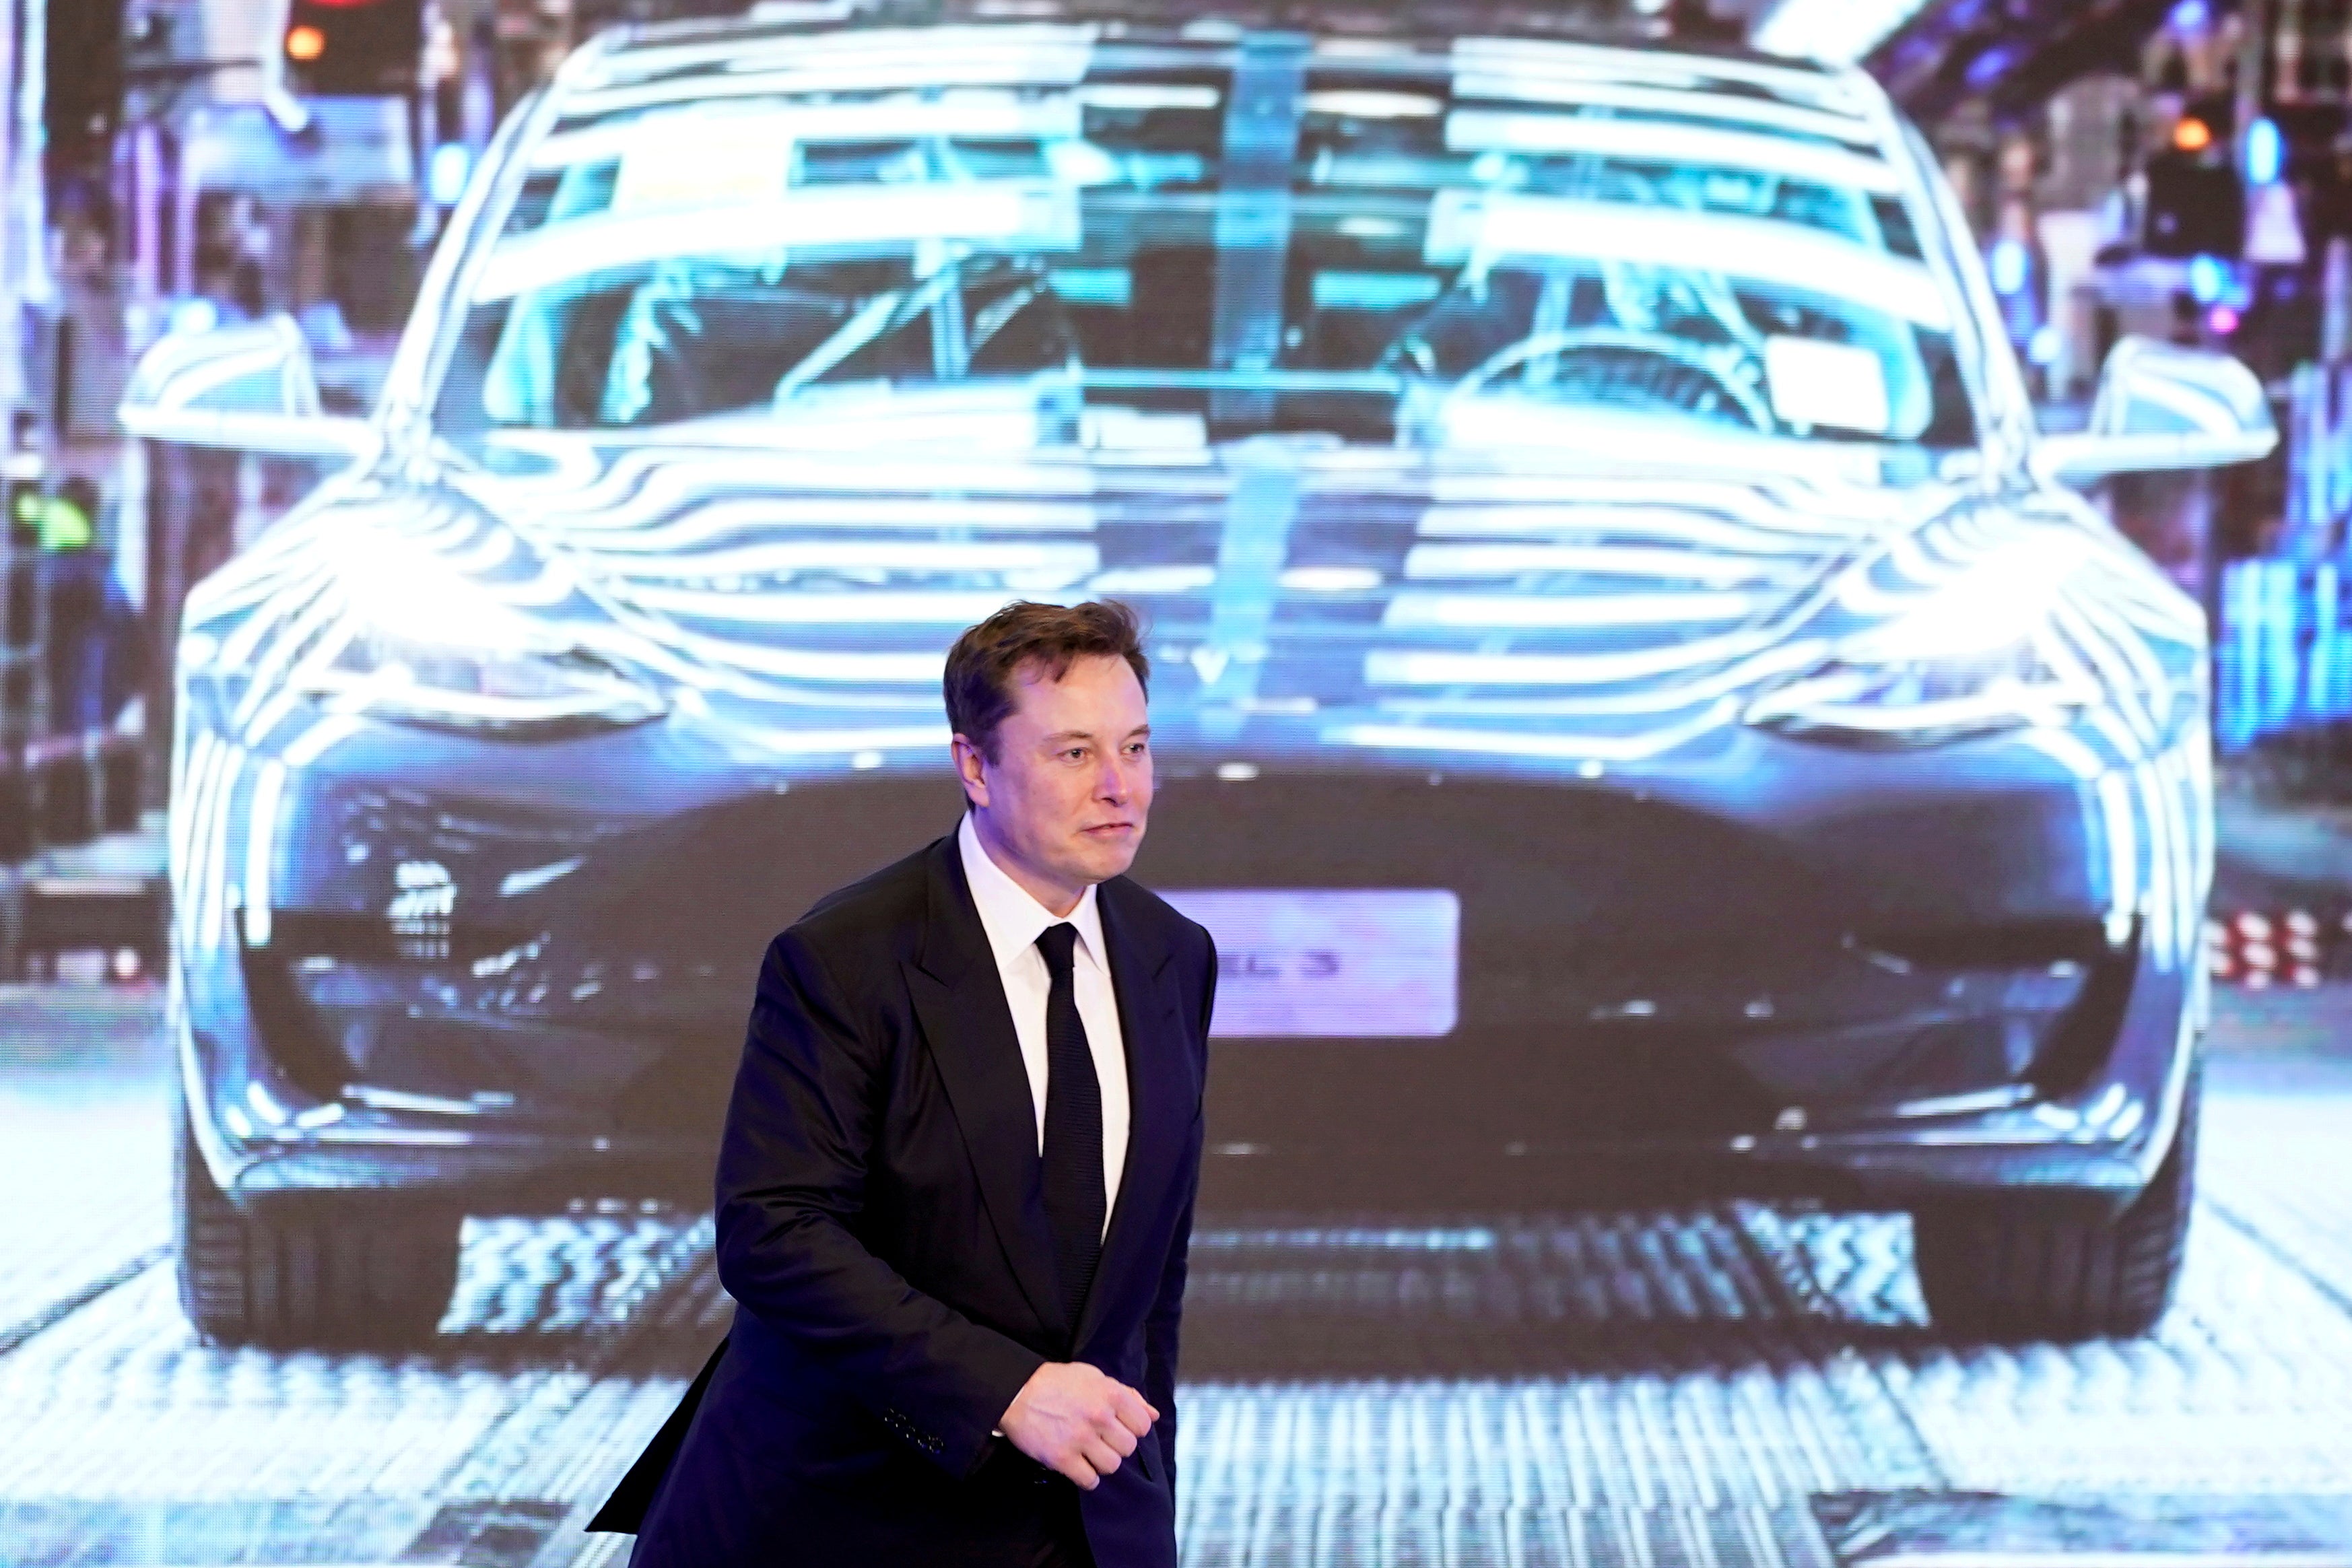 File image: Tesla Inc CEO Elon Musk walks next to a screen showing an image of Tesla Model 3 car during an opening ceremony for Tesla China-made Model Y program in Shanghai, China, 7 January 2020